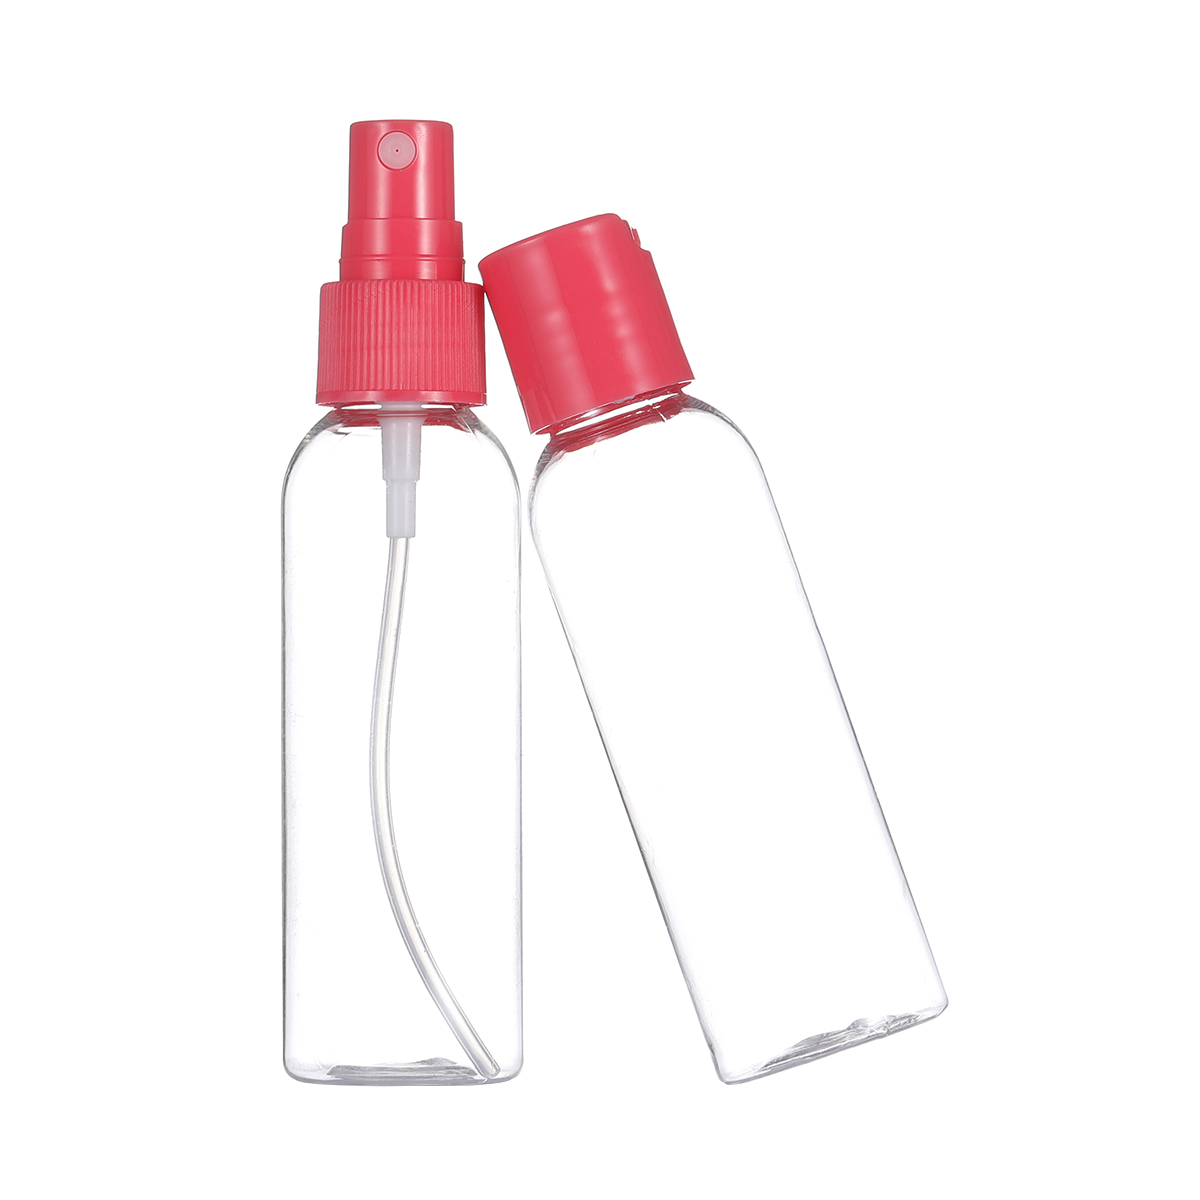 Alcohol disinfection spray bottle